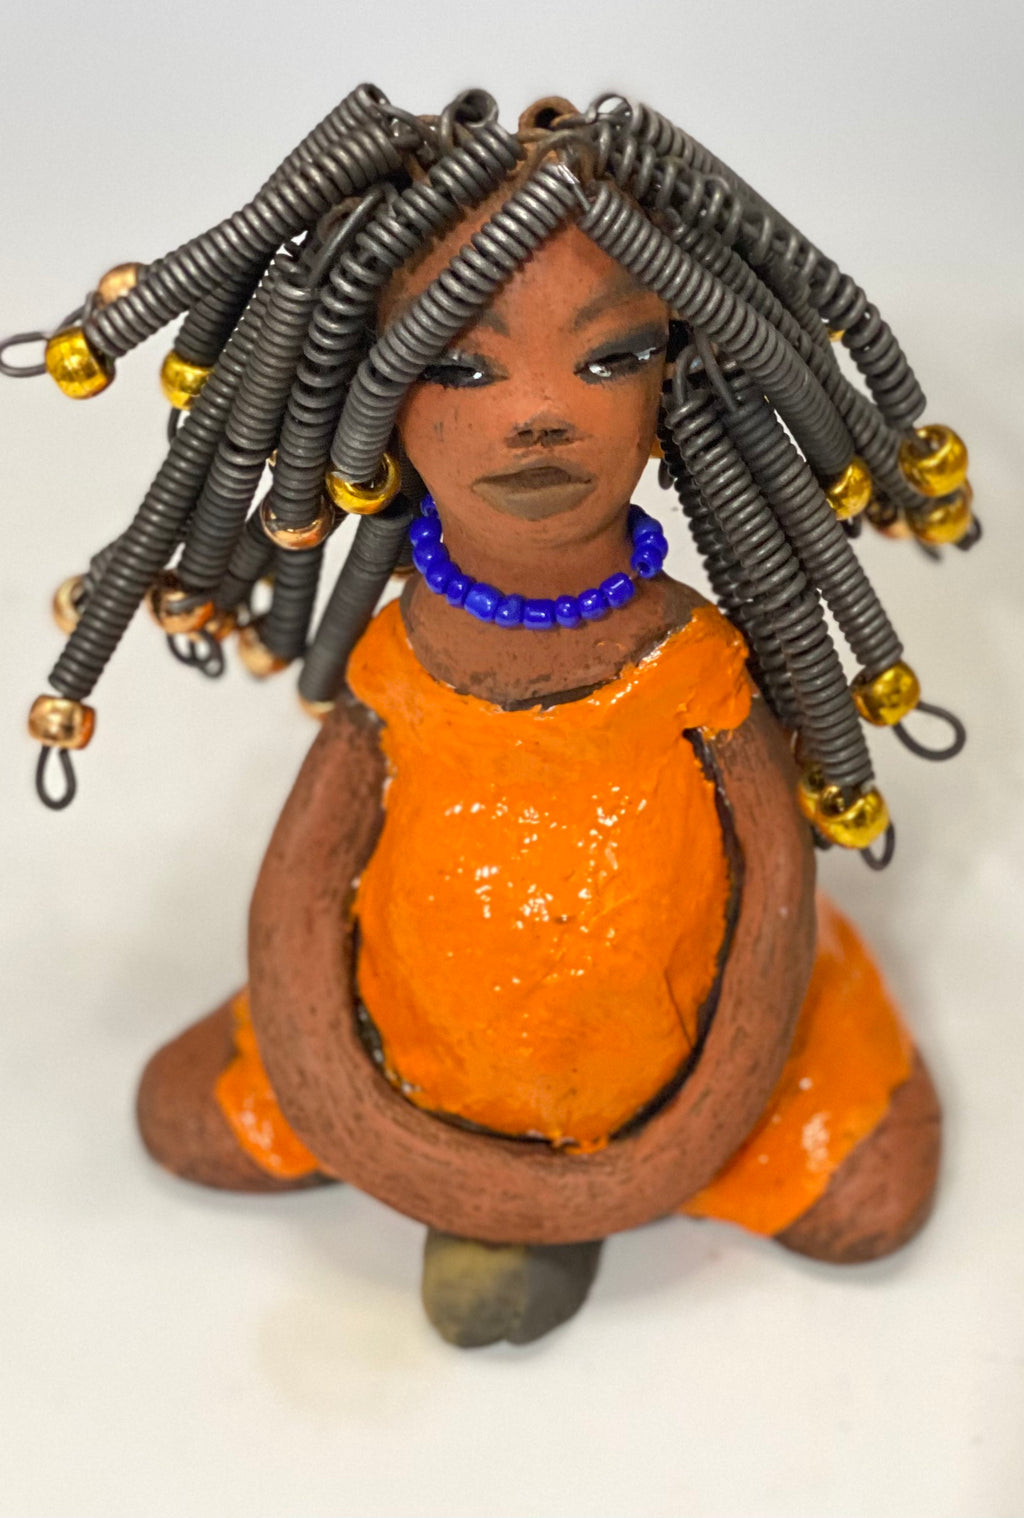  Meet Destiny!  Destiny stands 6.5" x 5" x 4" and weighs 1.05 lbs. She wears a lovely glossy sunset orange dress adorn by a blue beaded necklace. Destiny has over25 feet of 16 gauge coiled wire hair with gold beads.. Destiny appears to sit in a yoga pose. Her long arms rest at her side. Destiny is a great starter piece from the Herdew Collection!